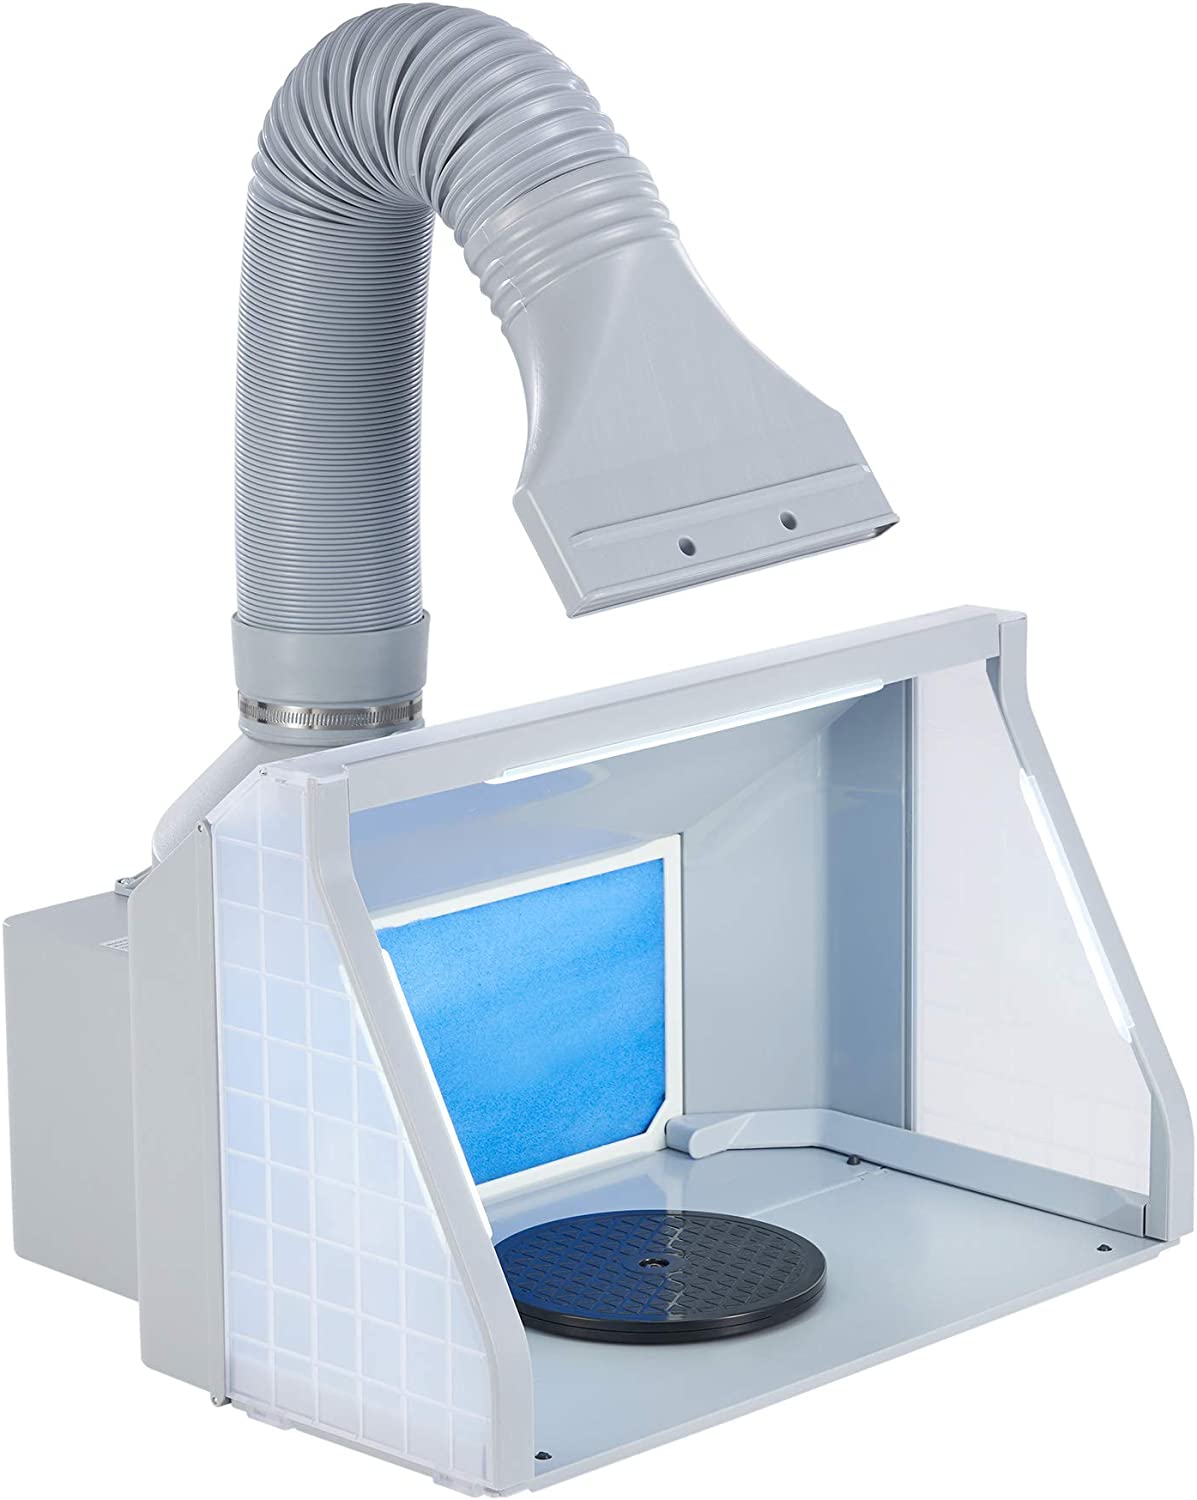 Lighted Airbrush Paint Spray Booth With Exhaust Fan, Portable